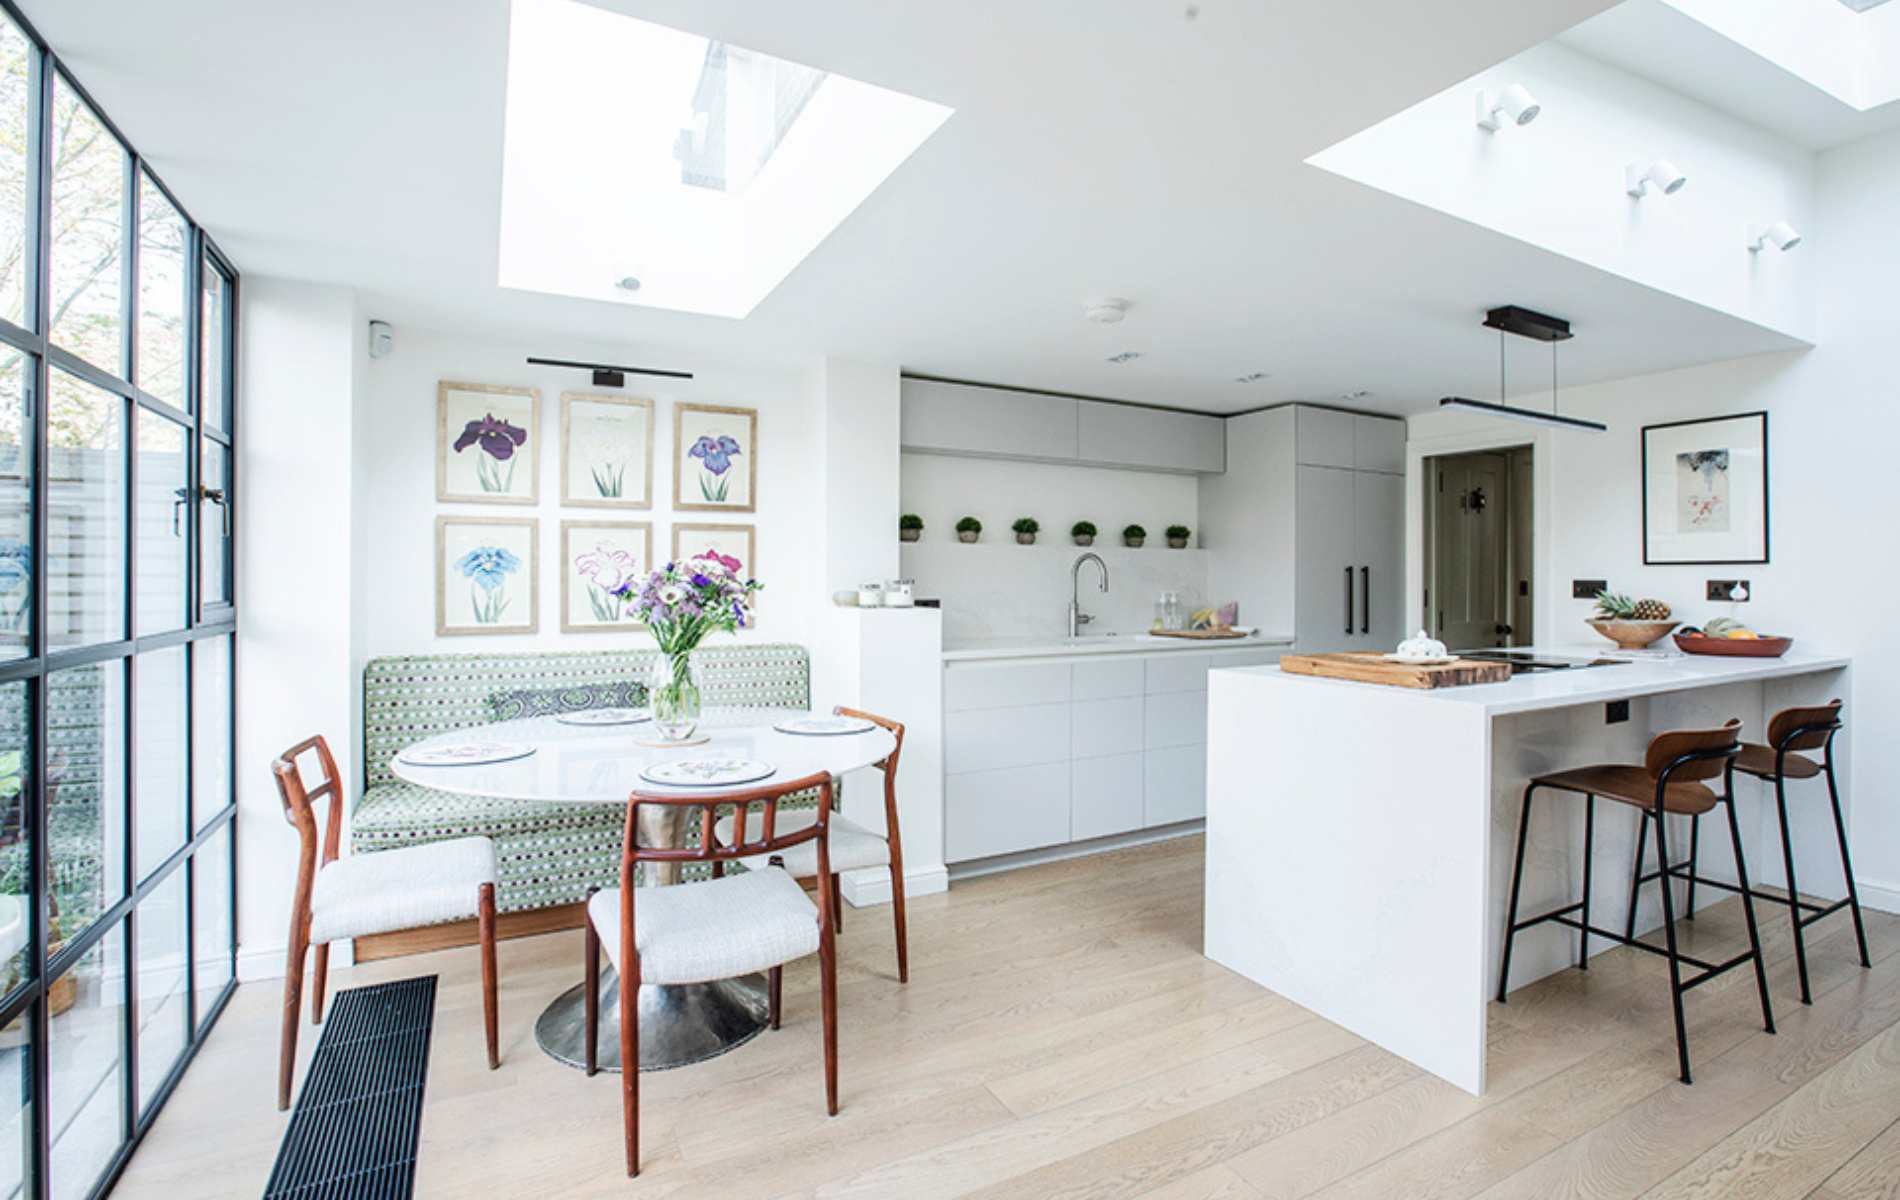 Should you renovate before selling your property? An estate agent’s advice